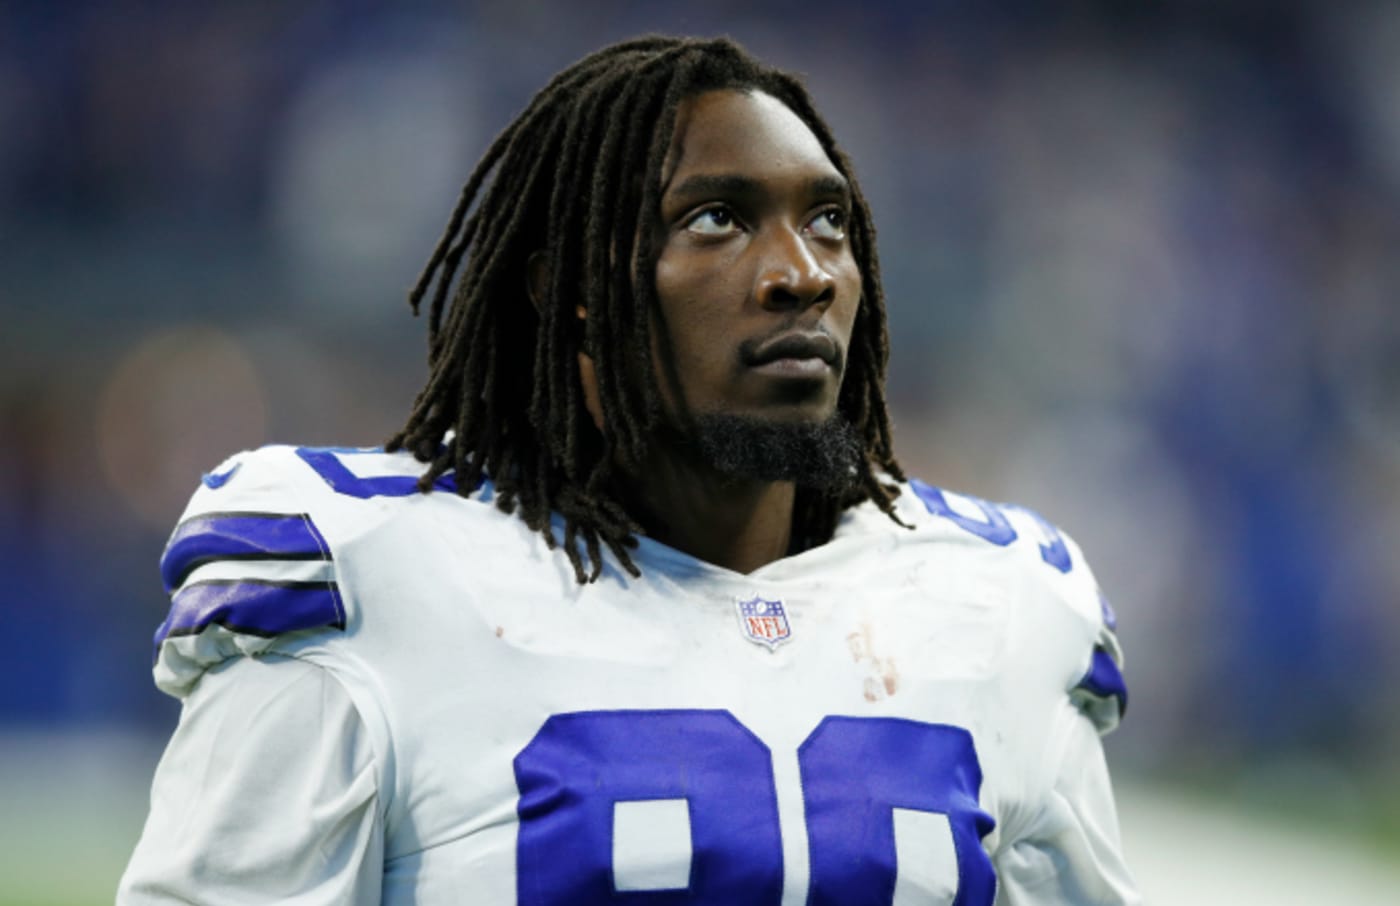 DeMarcus Lawrence #90 of the Dallas Cowboys